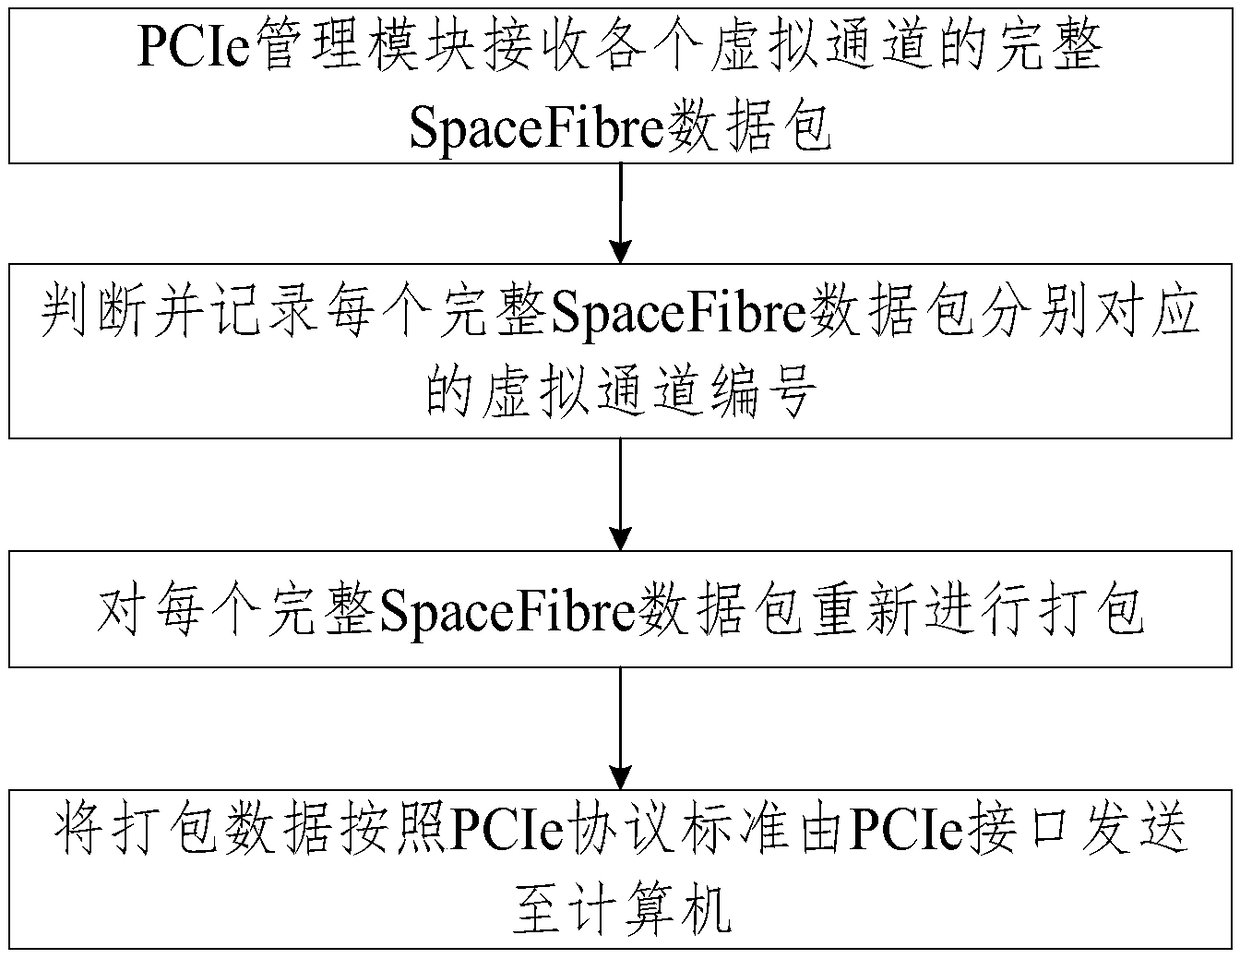 A SpaceFibre bus data acquisition method based on PCIe interface